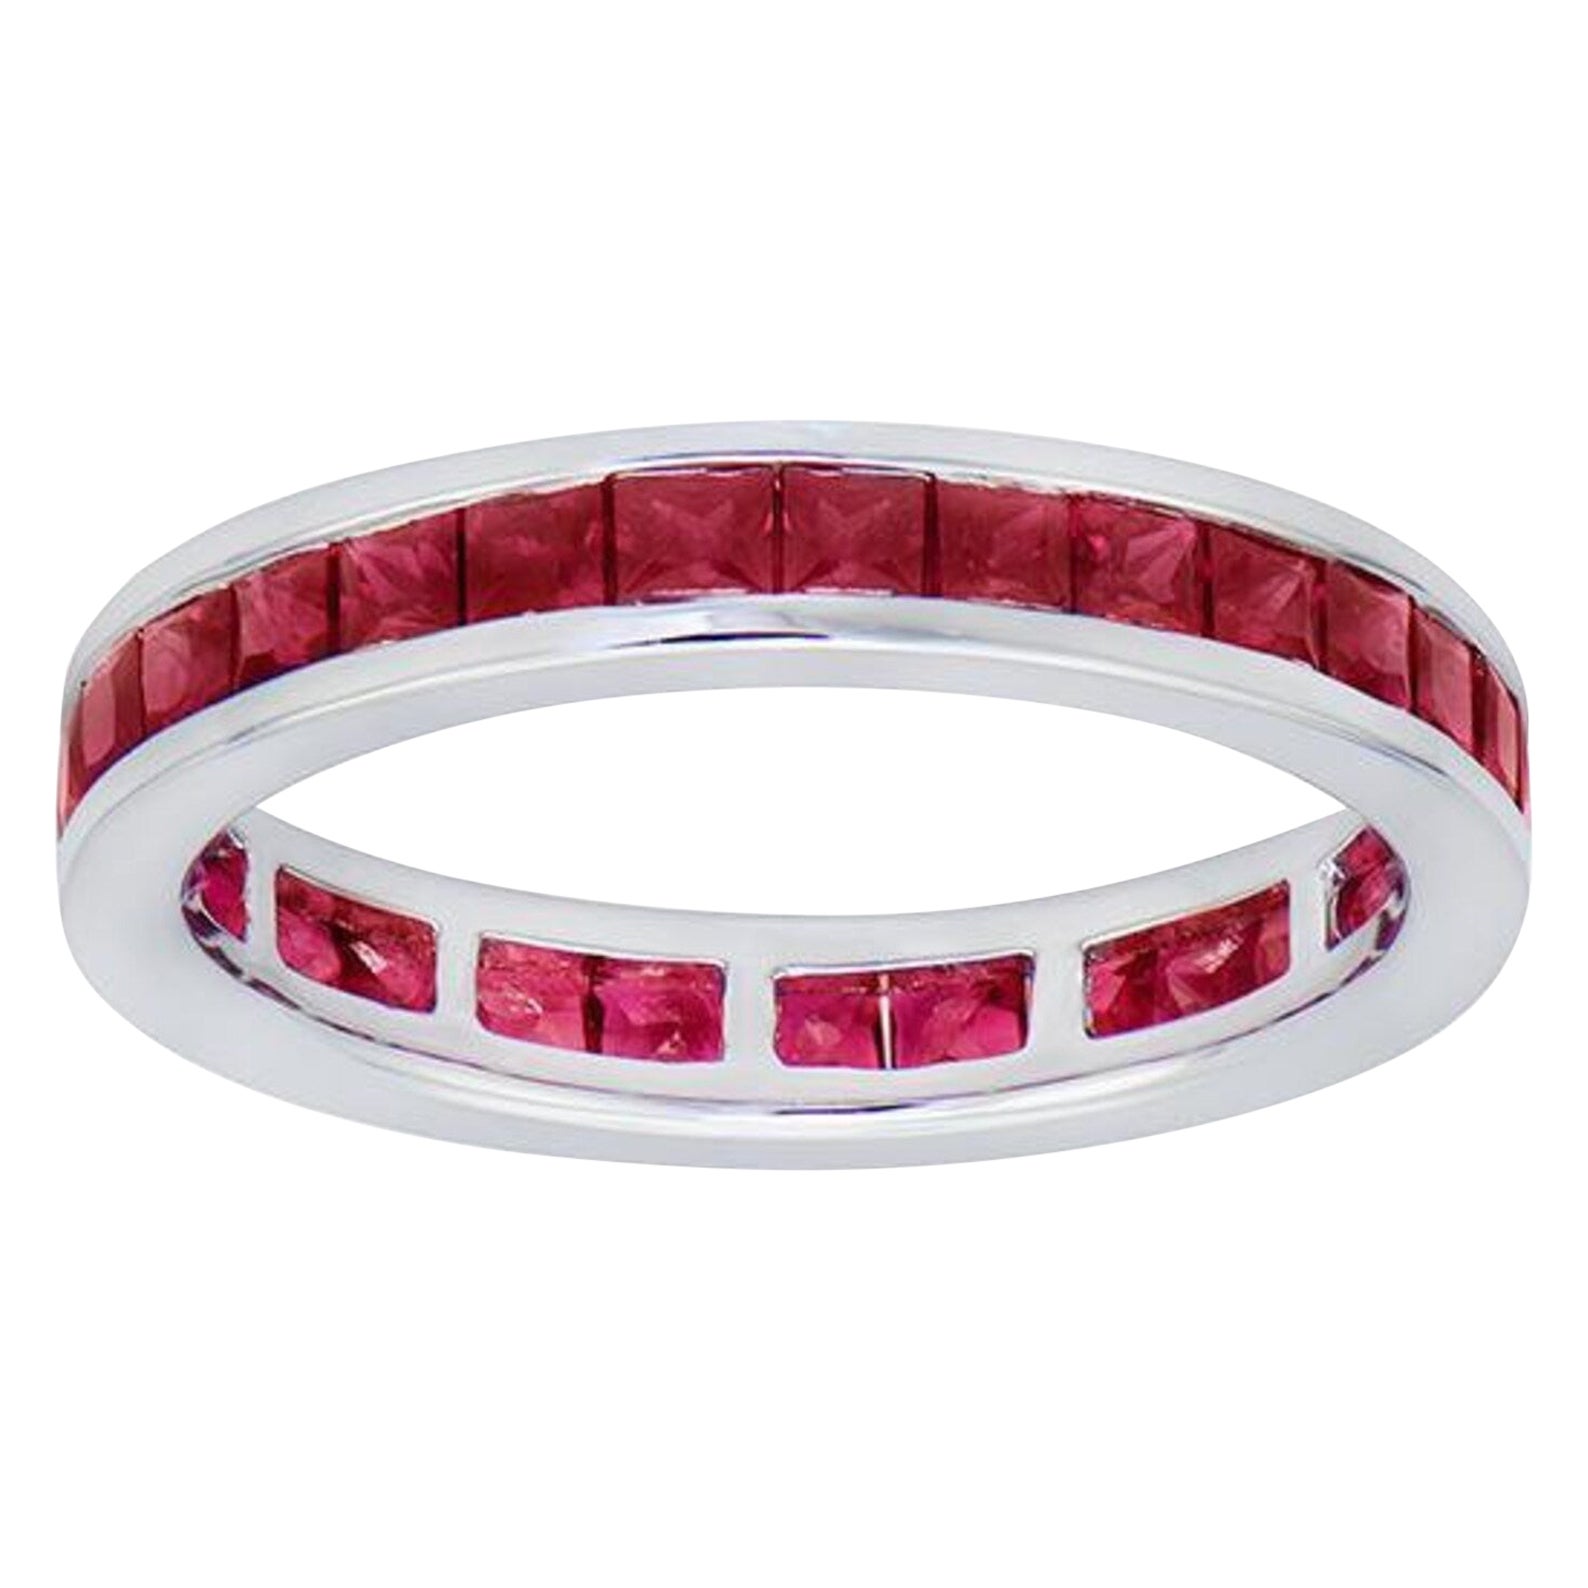 2.28 Carat Channel Set Ruby Band in 18K White Gold